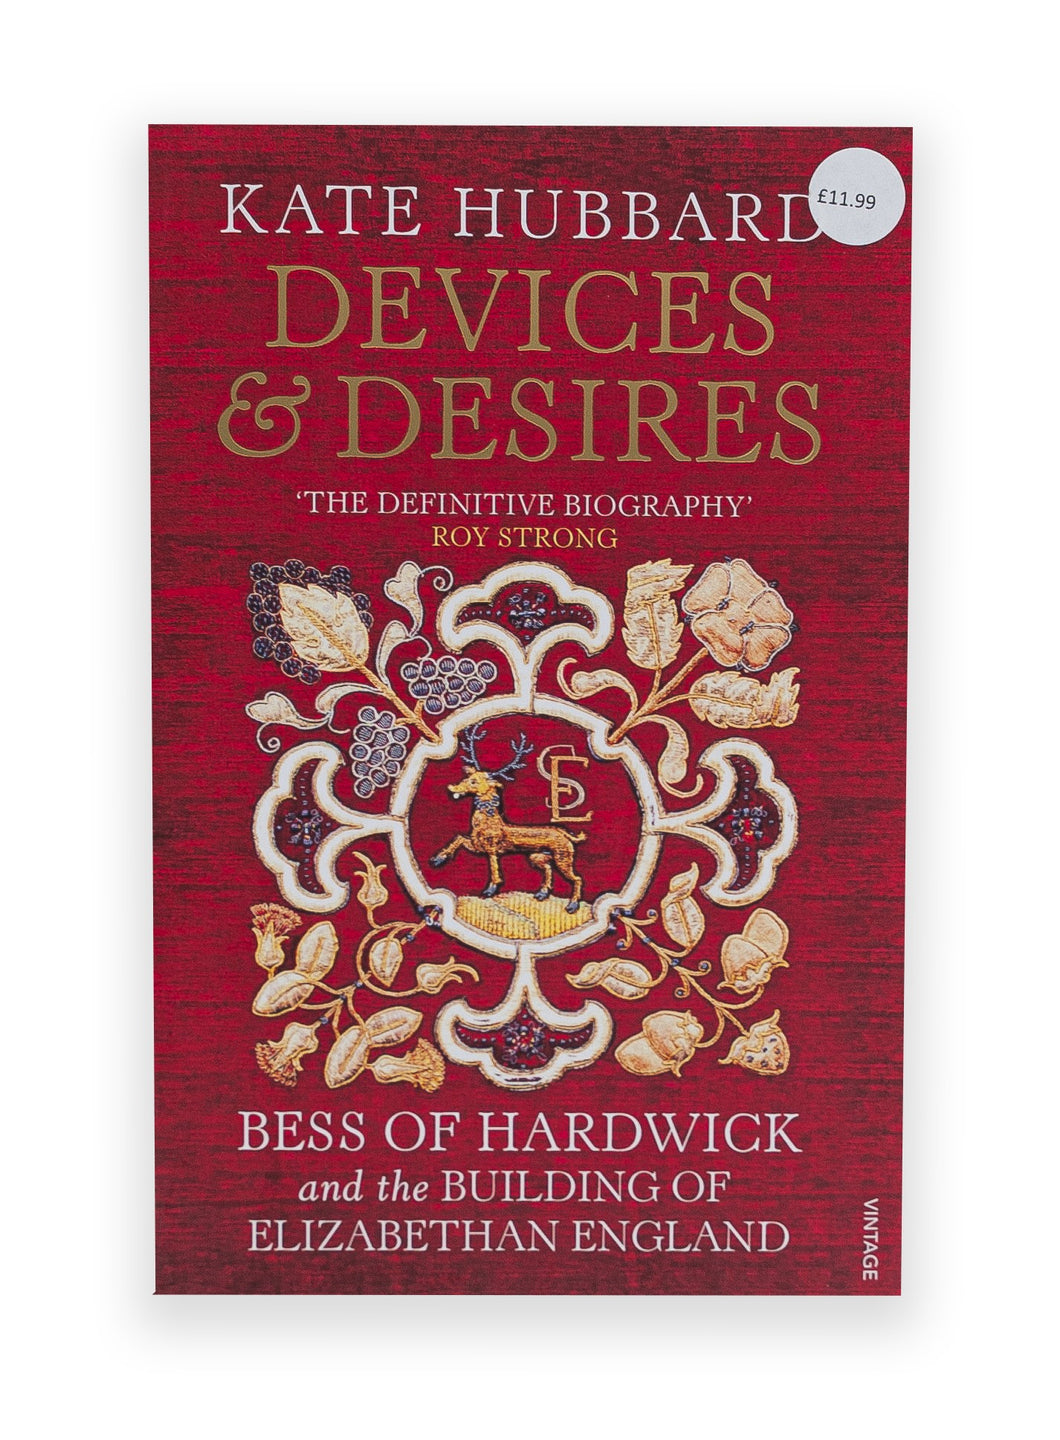 Kate Hubbard - Devices and Desires for sale at the Harley Gallery Bookshop